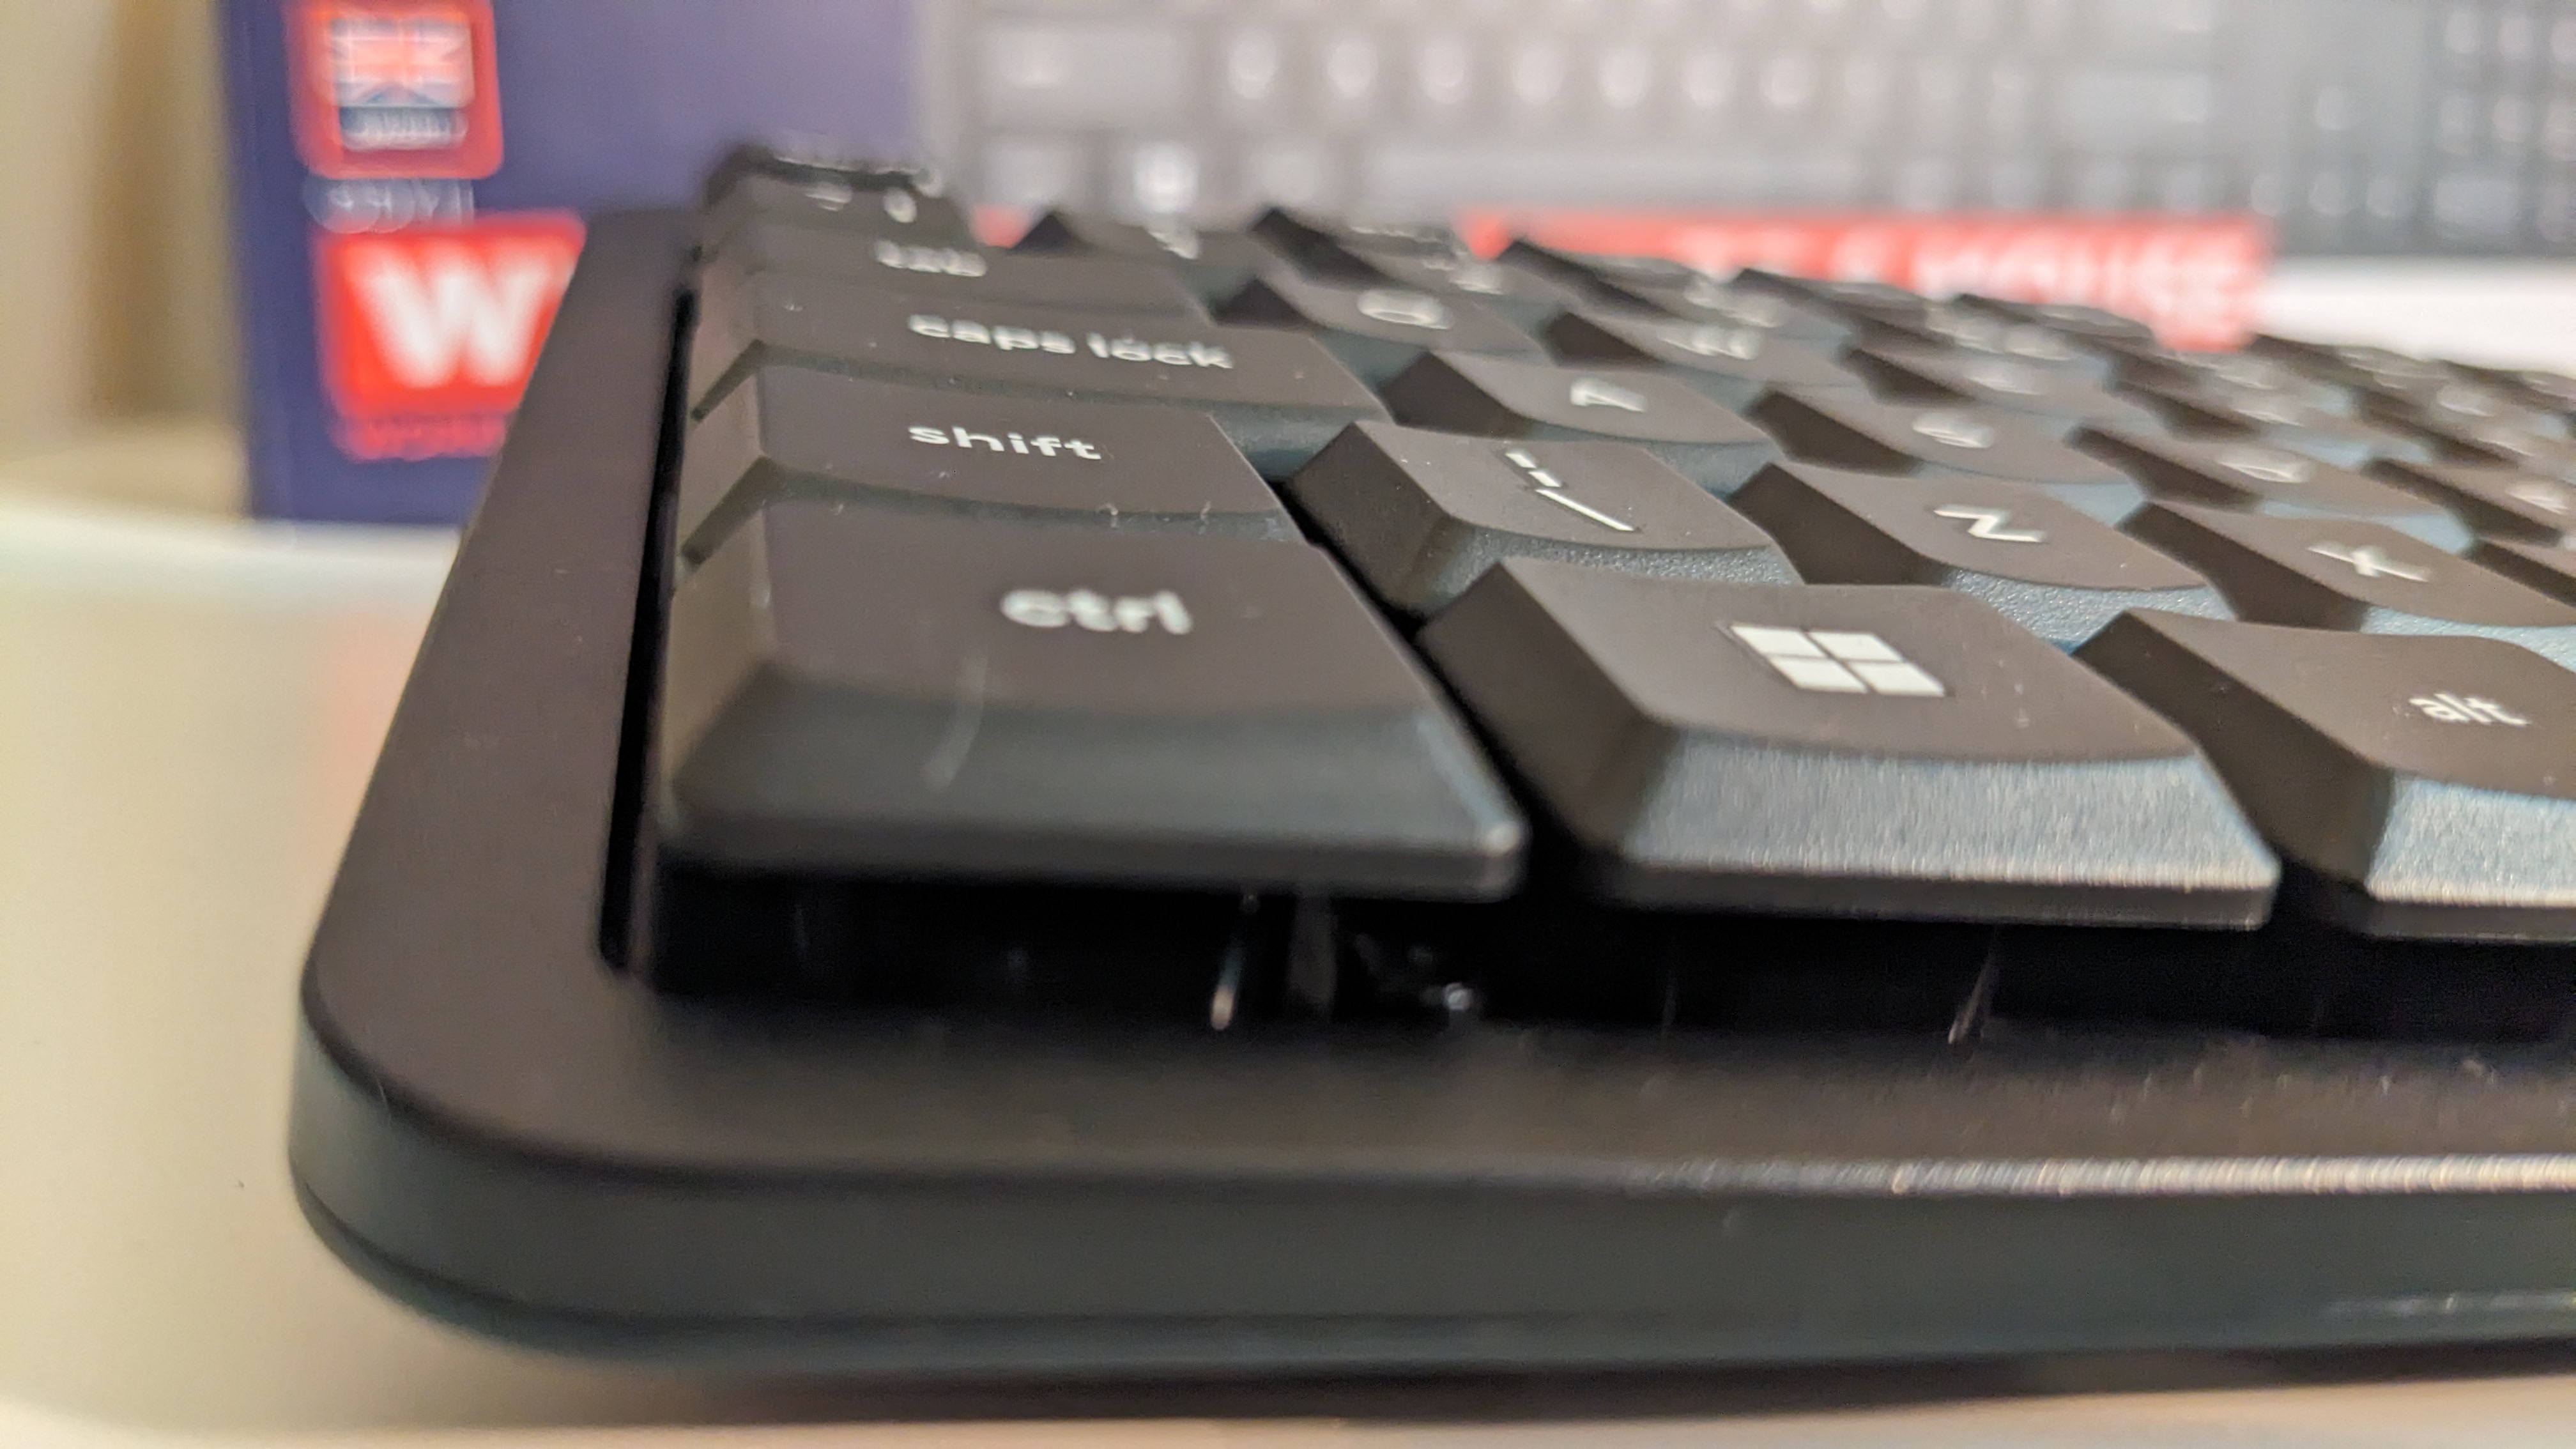 Trust Ody II Silent Wireless keyboard and mouse during our test and review process